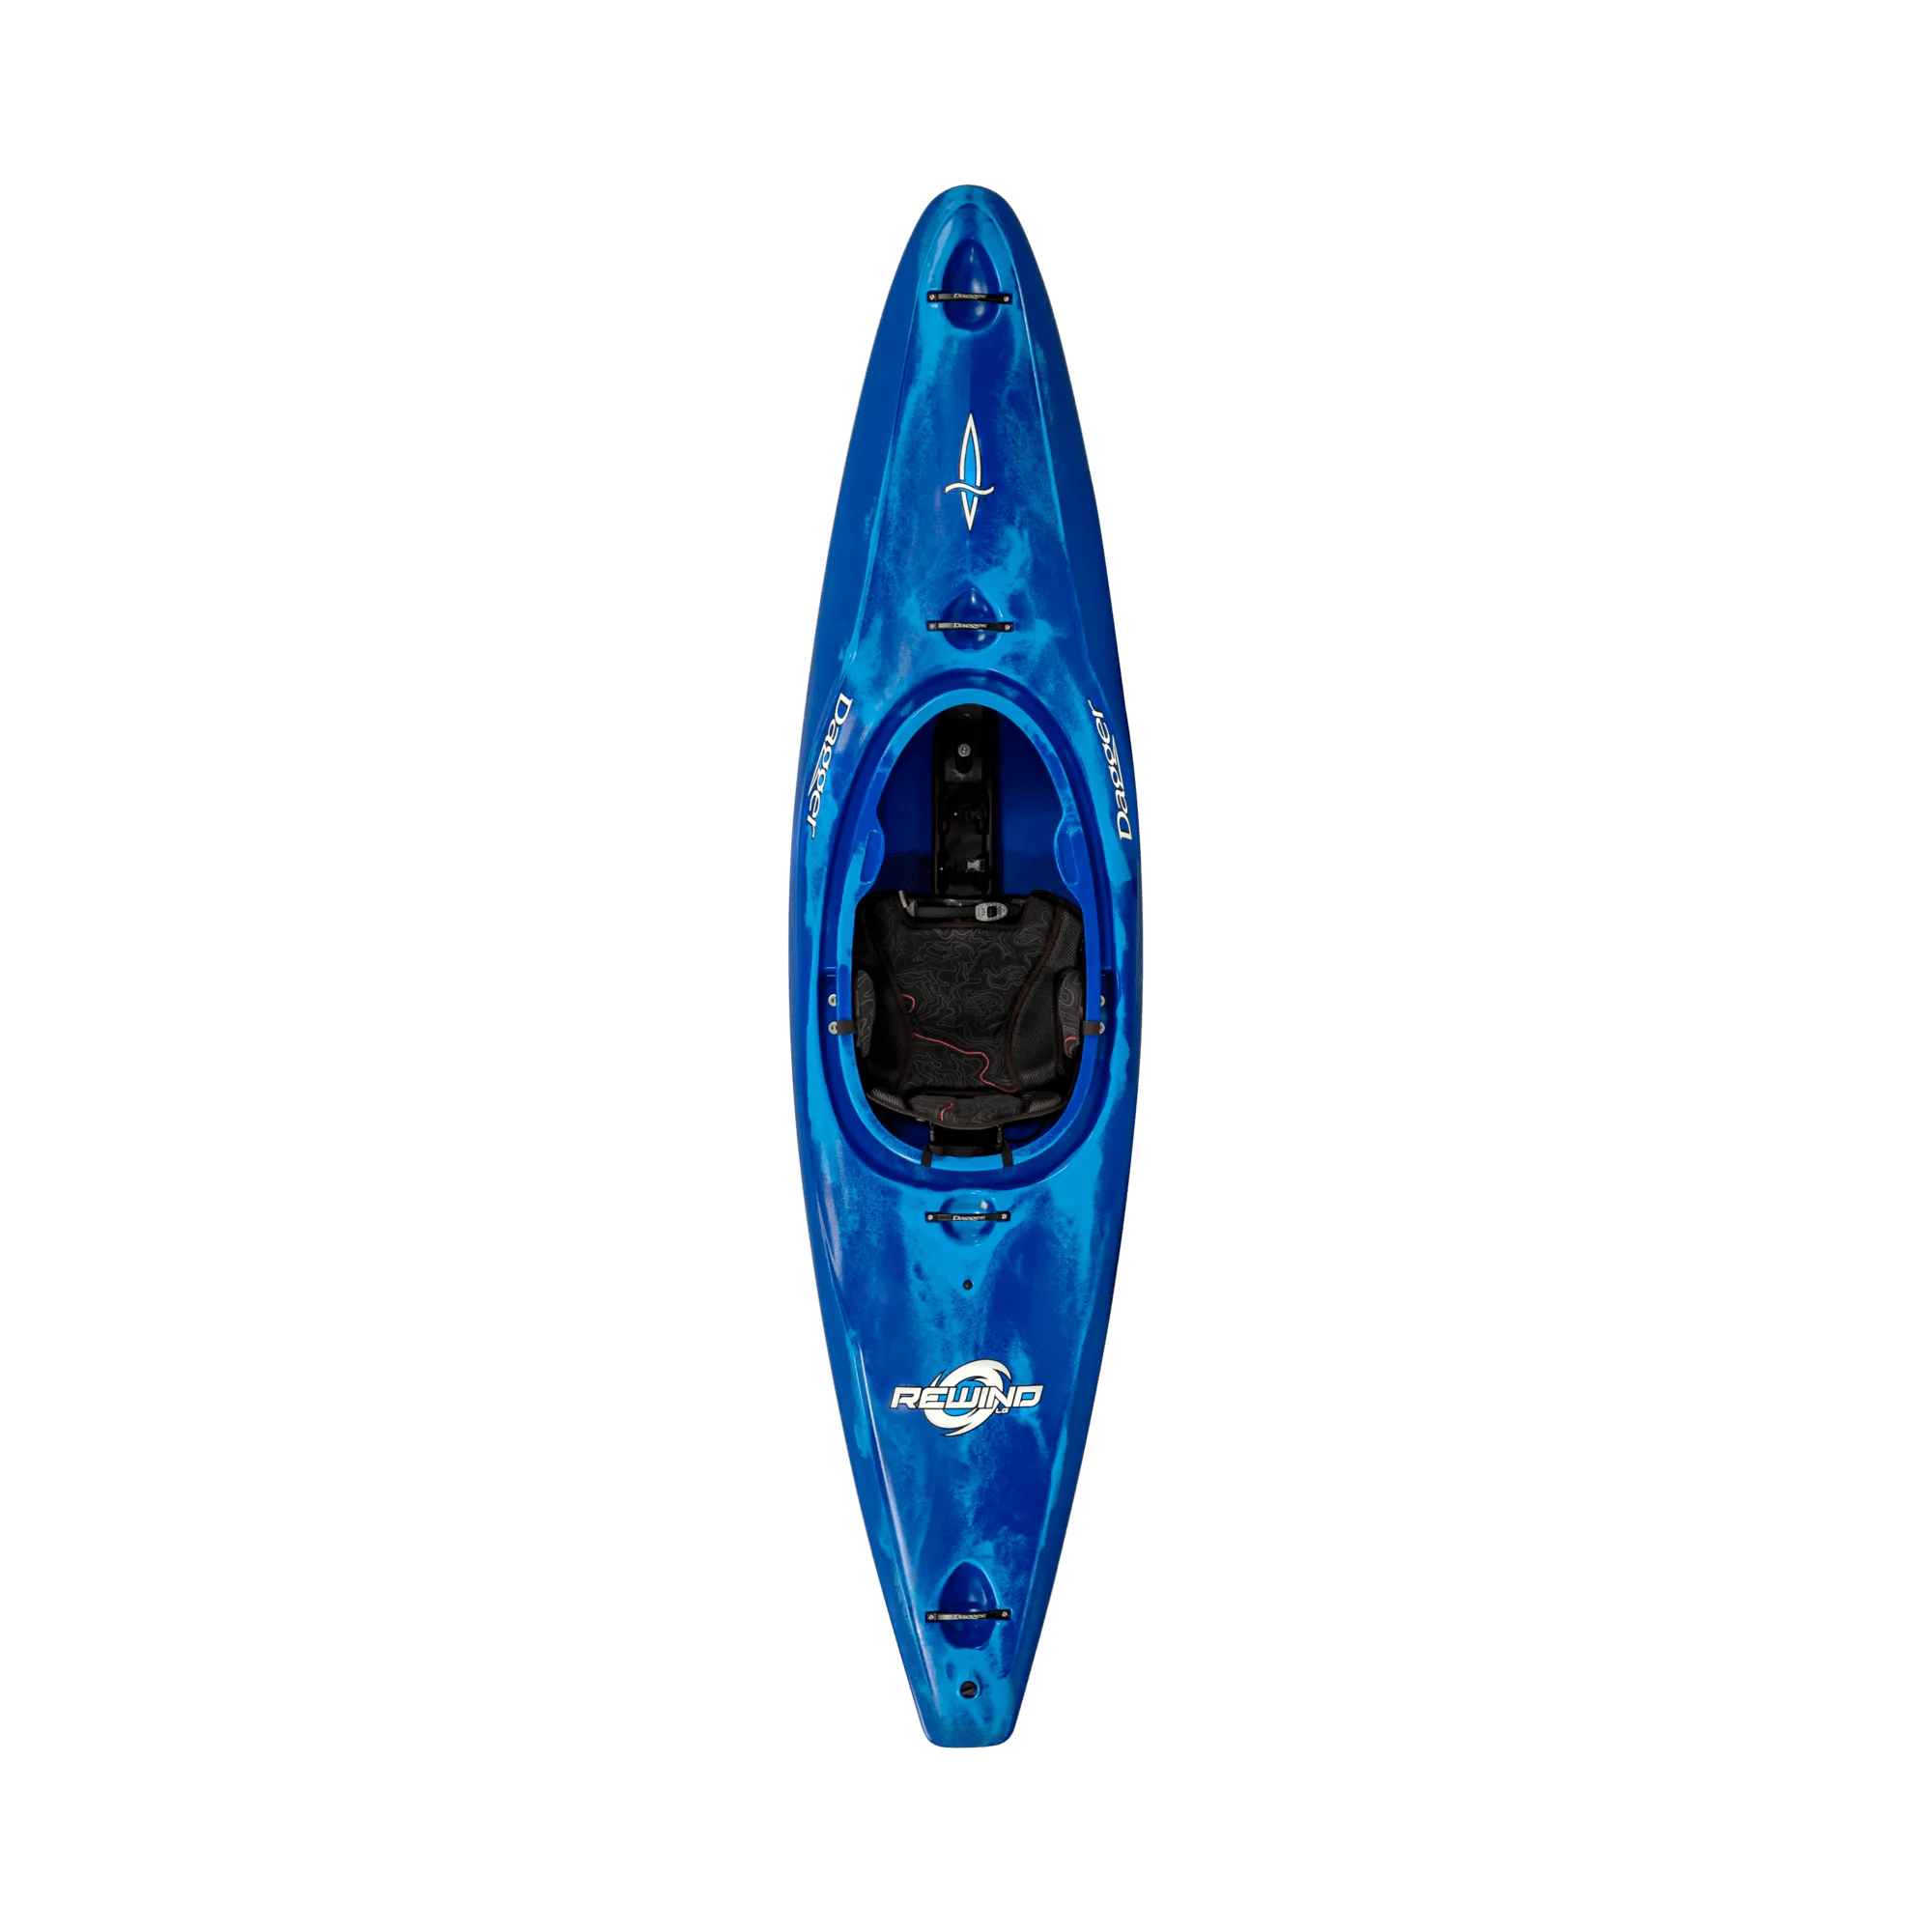 DAGGER - Rewind L River Play Whitewater Kayak - Blue - 9010484206 - TOP